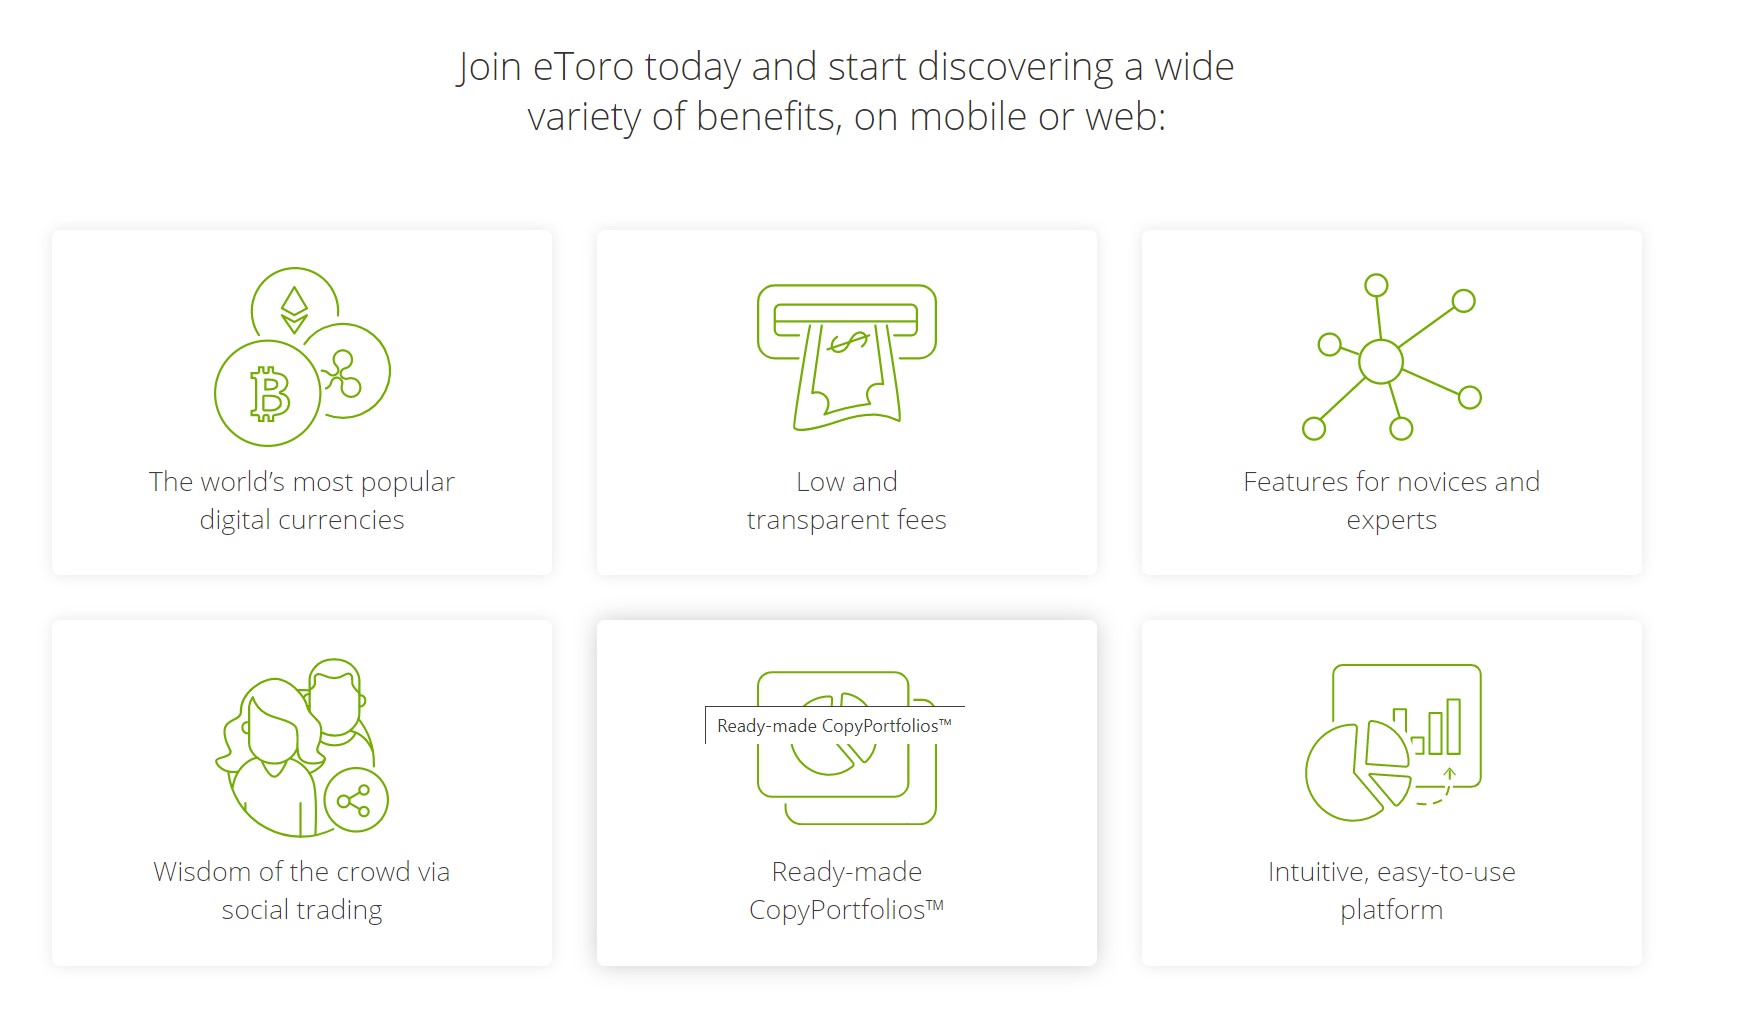 eToro US Review (2021) - Is It A Good Place to Buy Crypto?